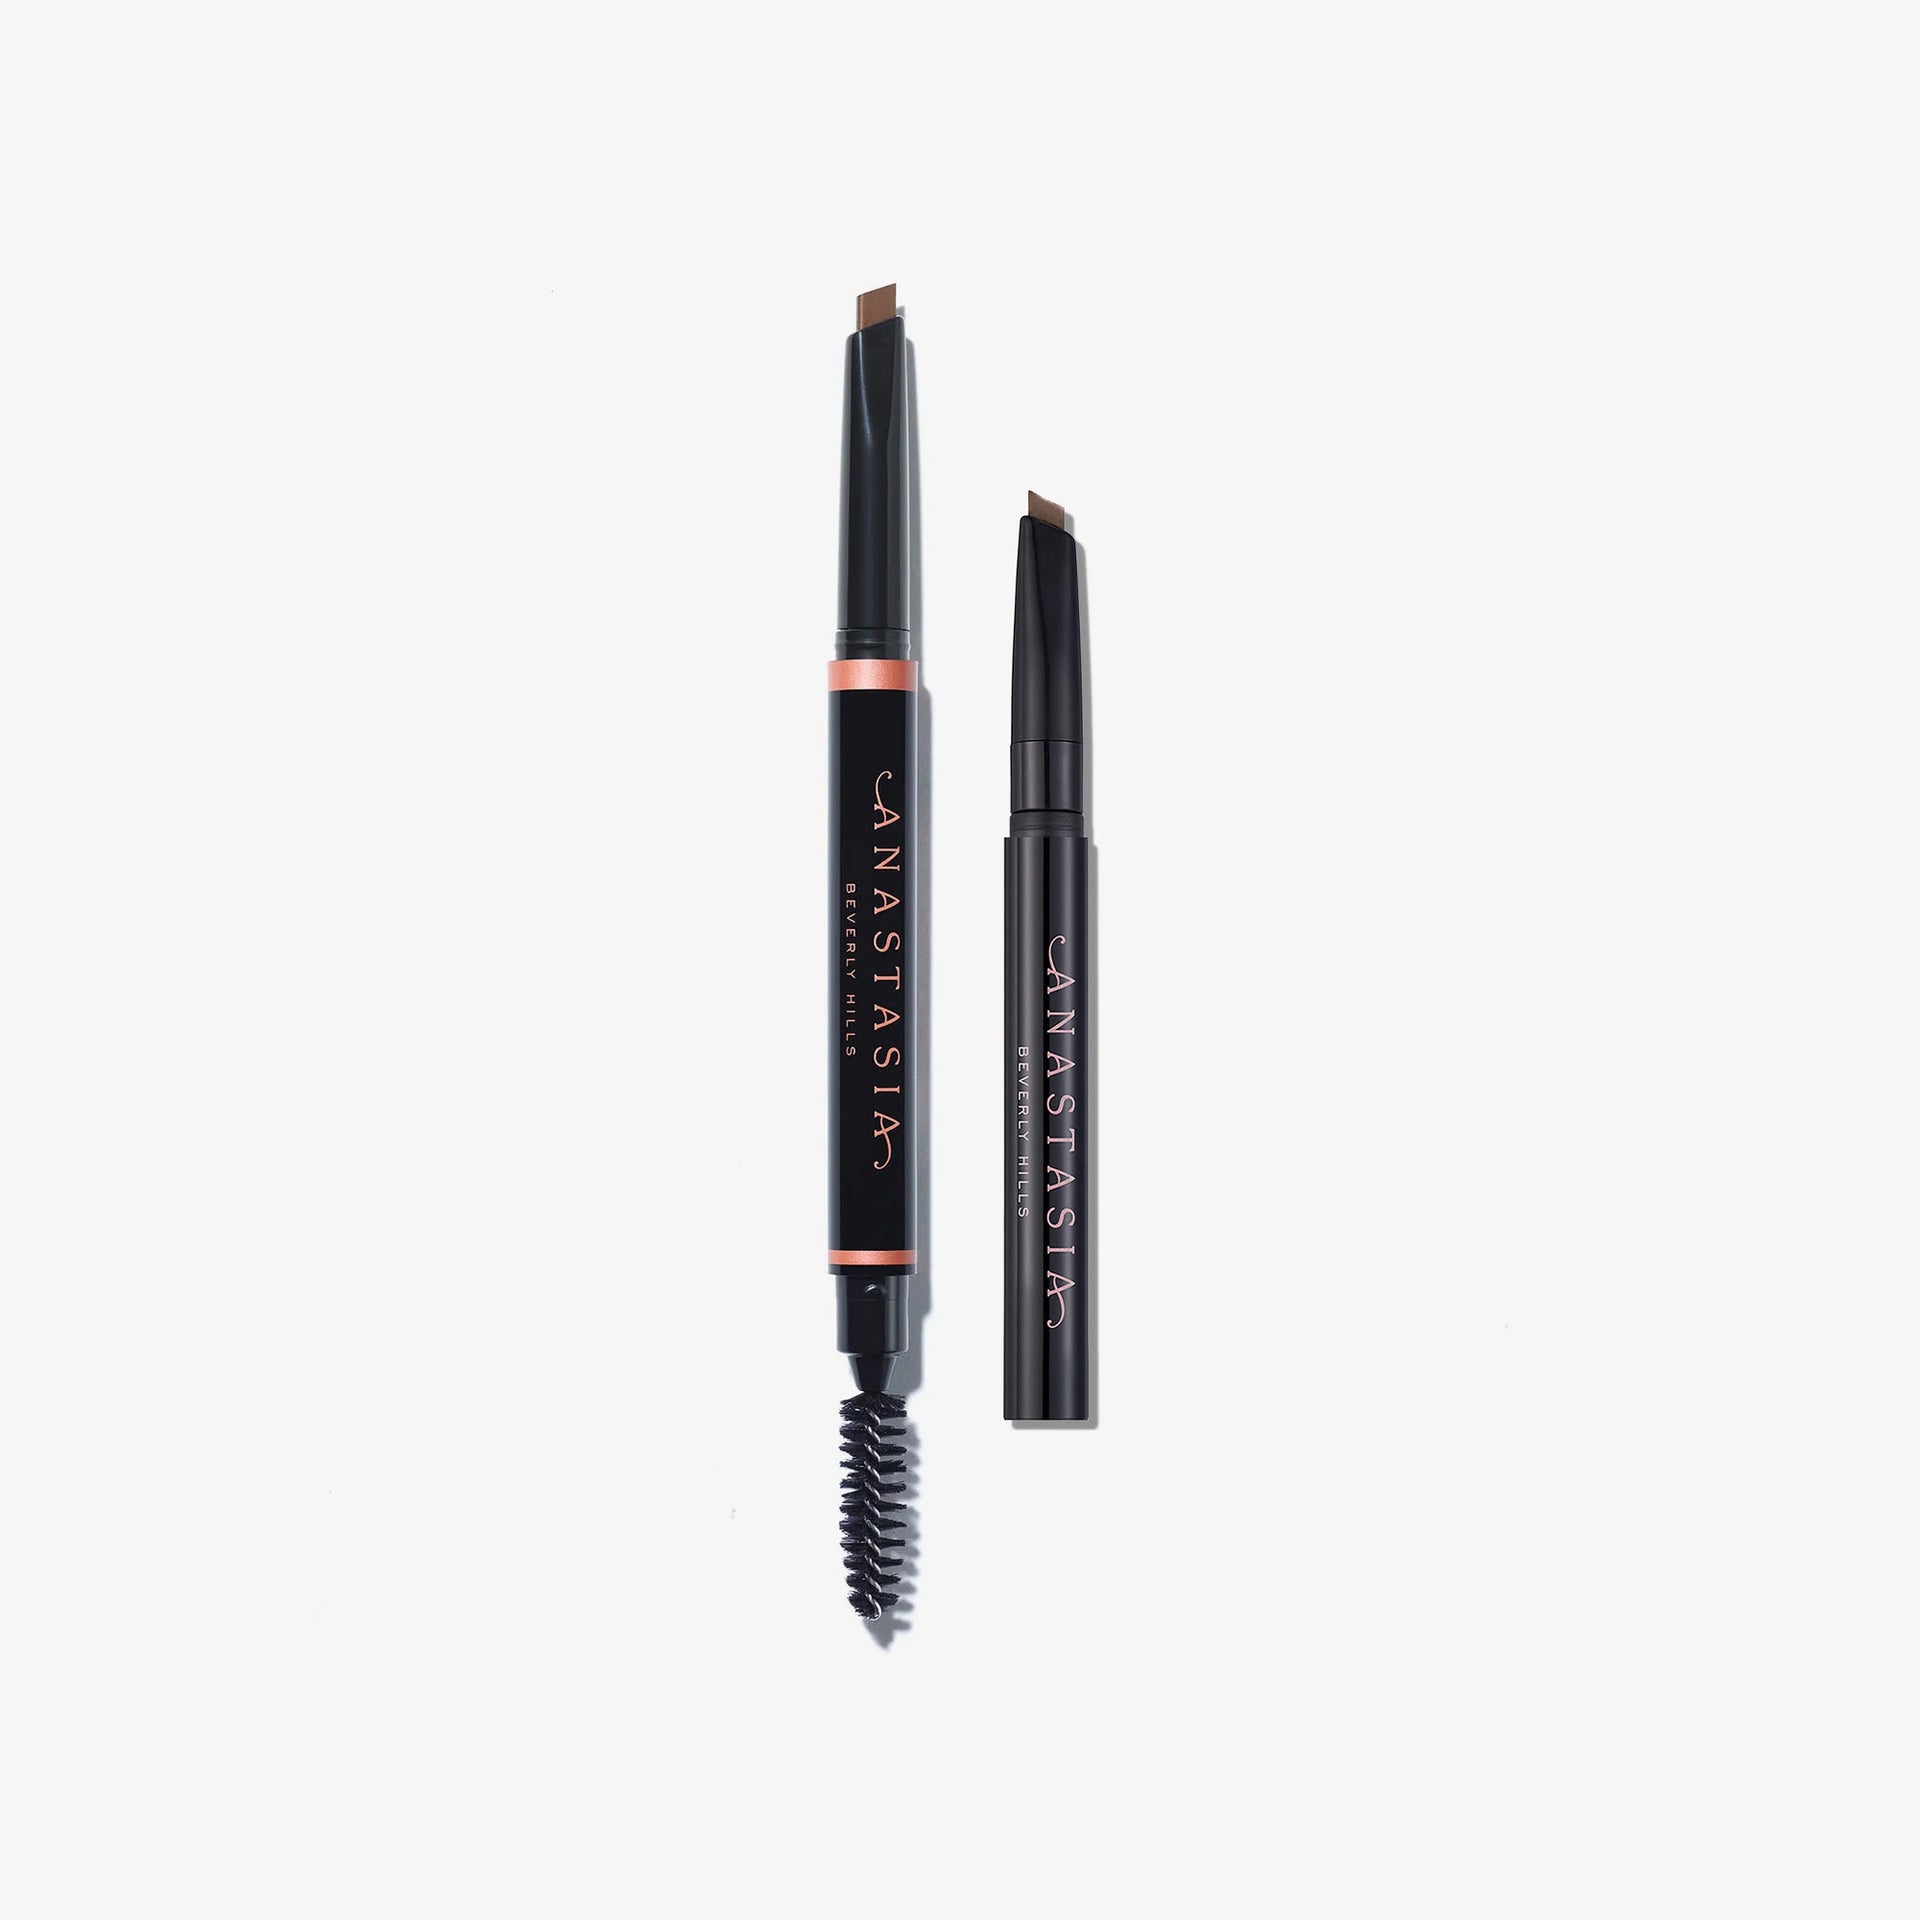 Discover Defined Brows Duo